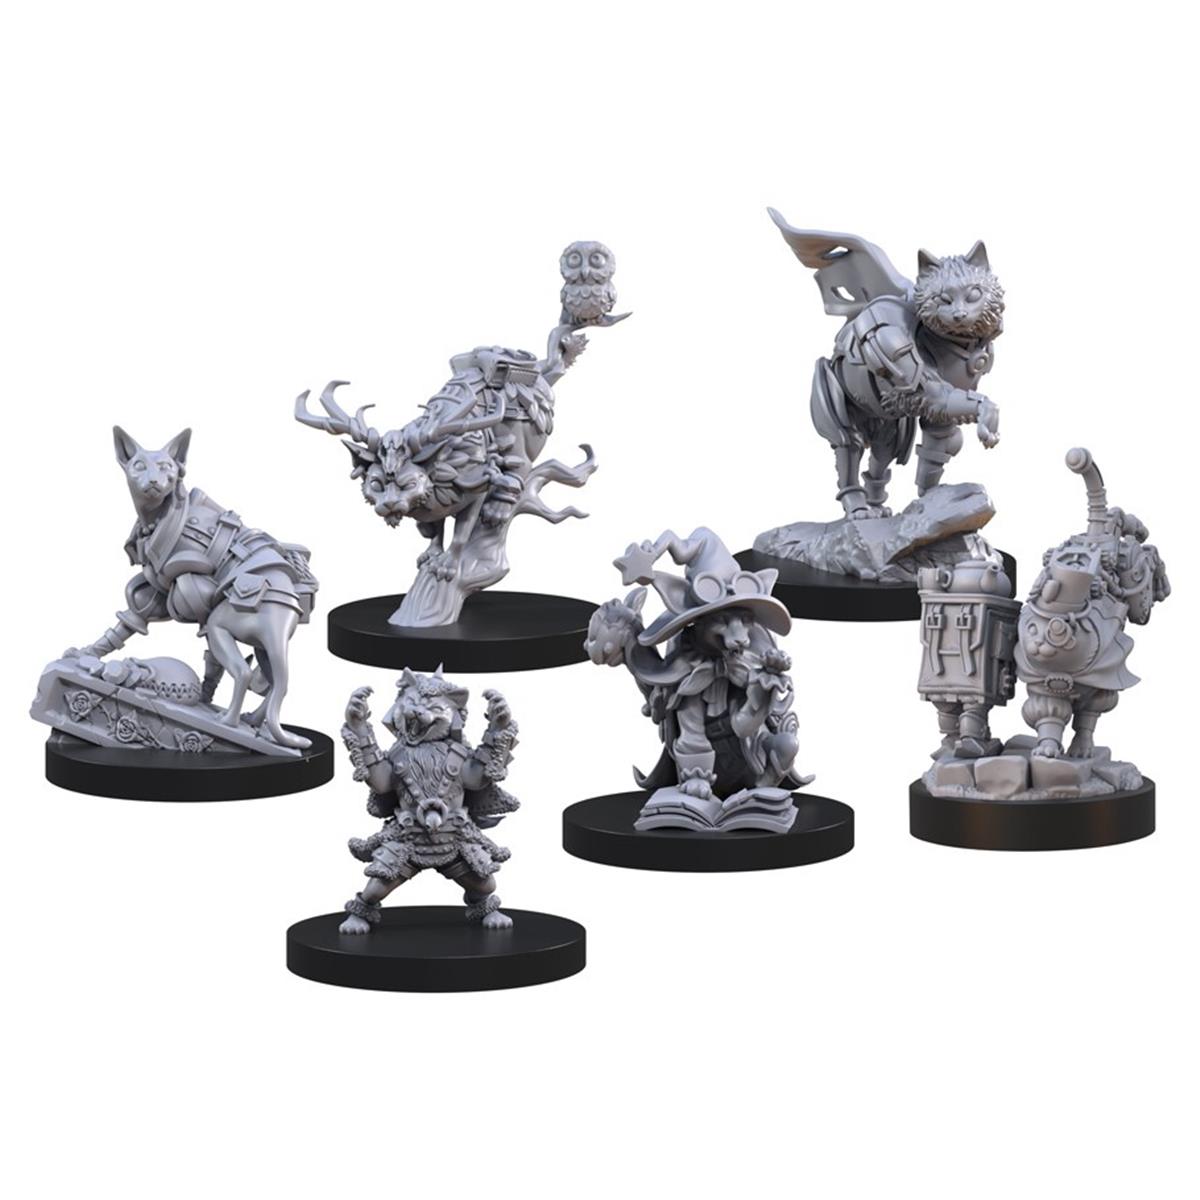 Picture of Steamforged Games STEAATFS-003 Animal Adventures Faraway Sea Cats Figurines